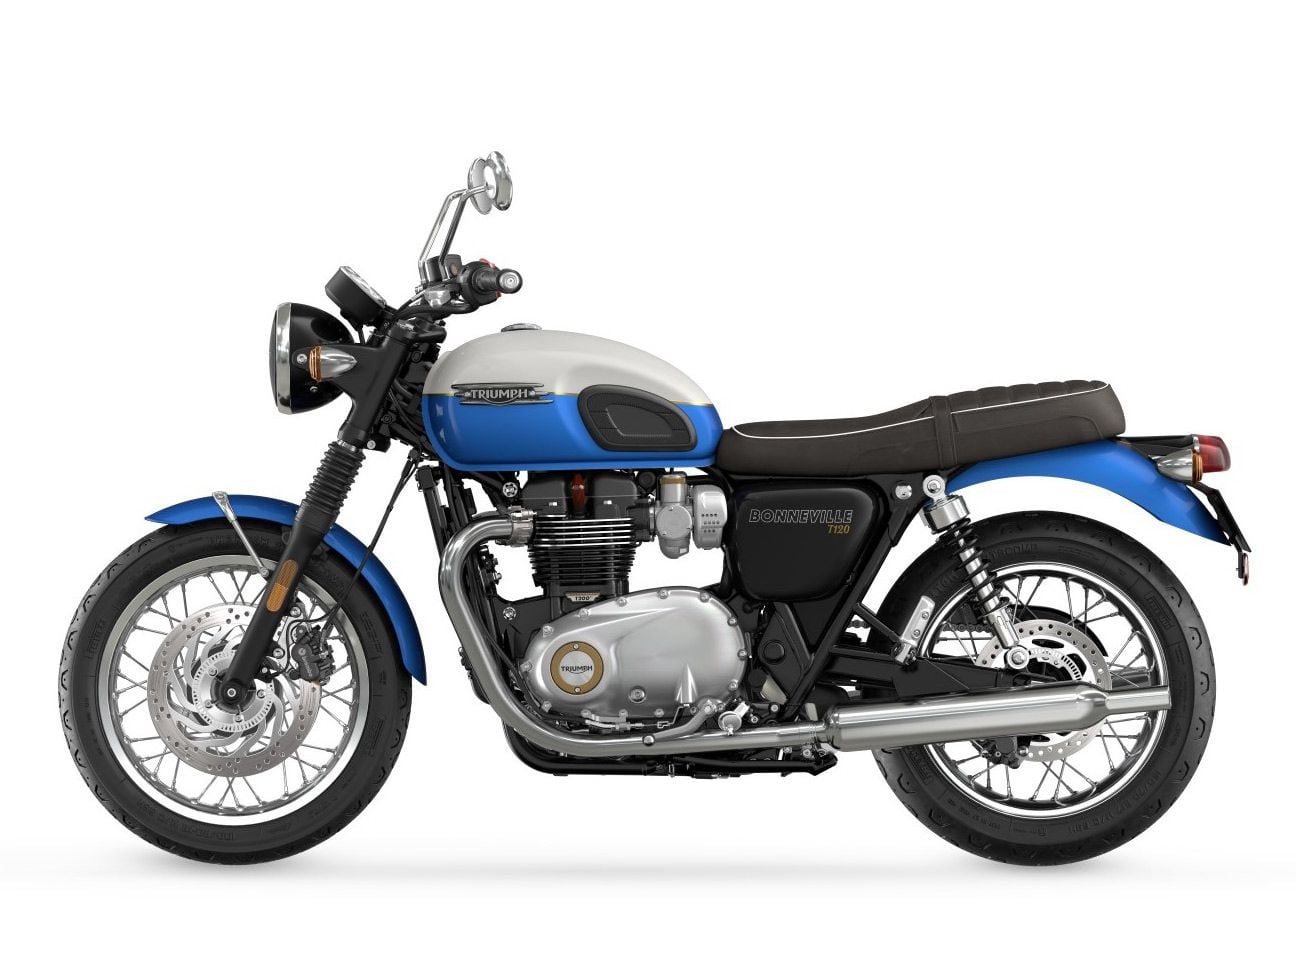 The T120 returns unchanged for 2023 save for the addition of this new Aegean Blue/Fusion White color option.